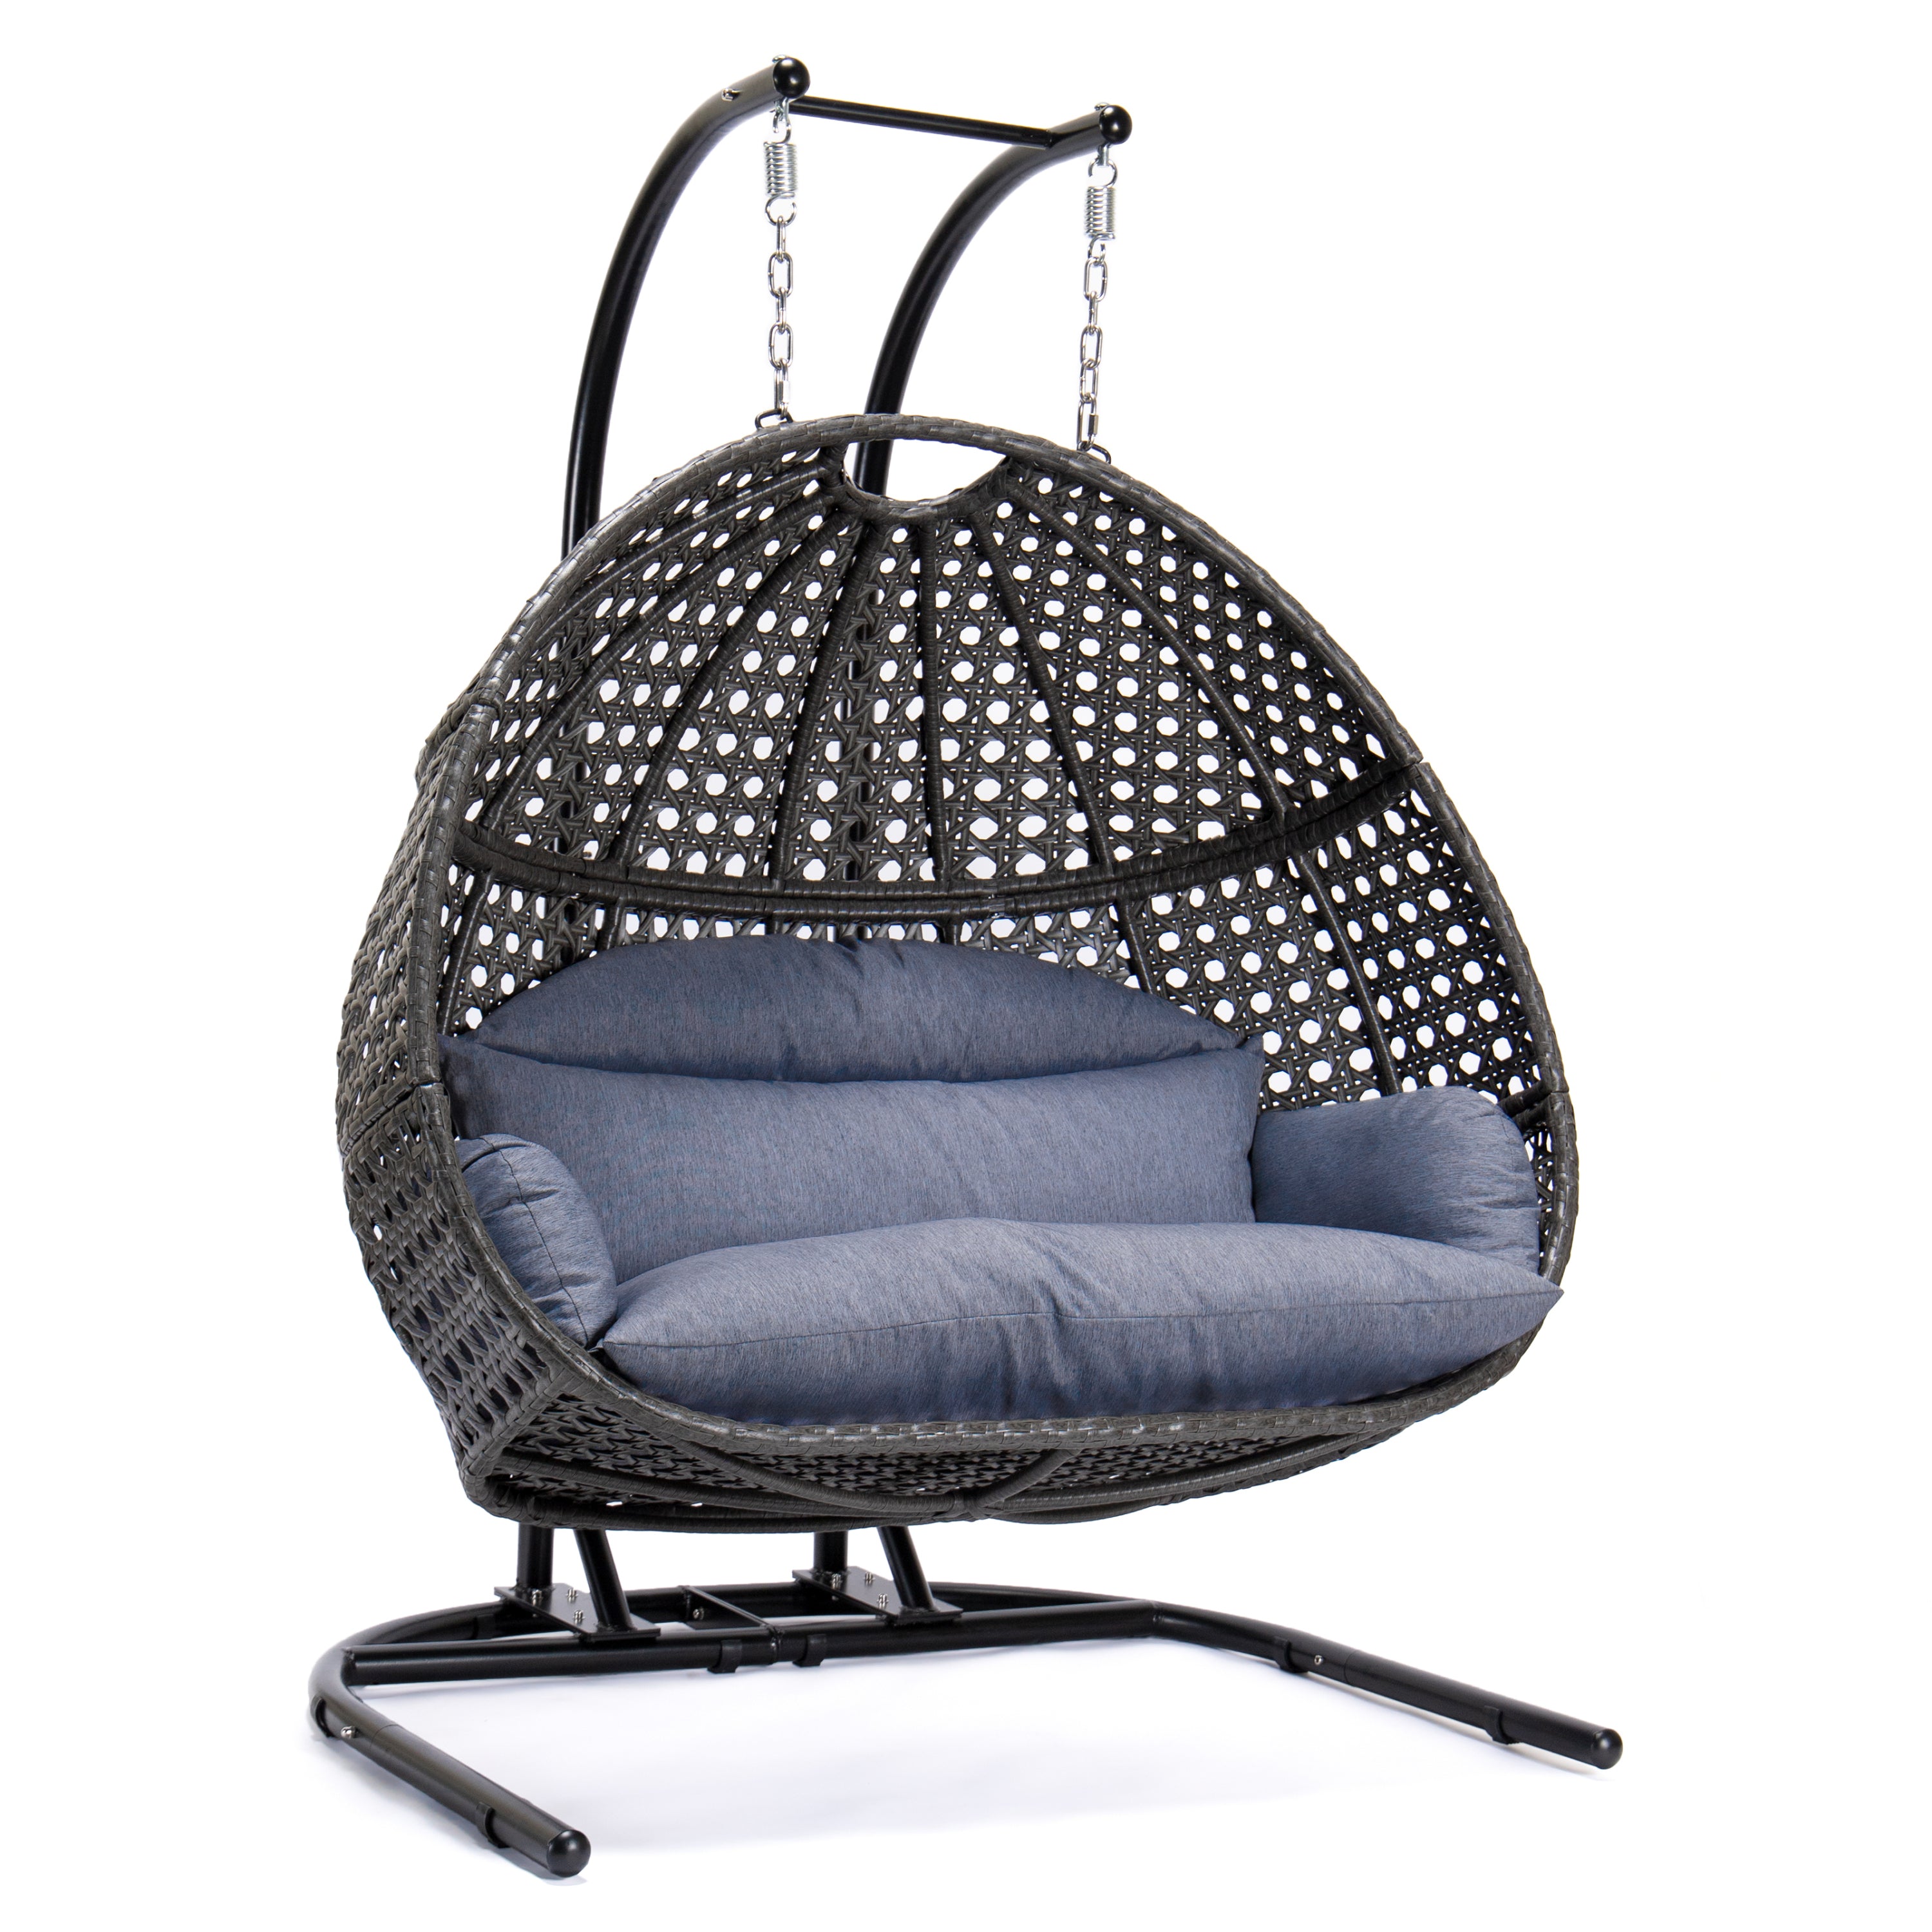 Charcoal Wicker Hanging Double-Seat Swing Chair with Stand w/Dust Blue Cushion